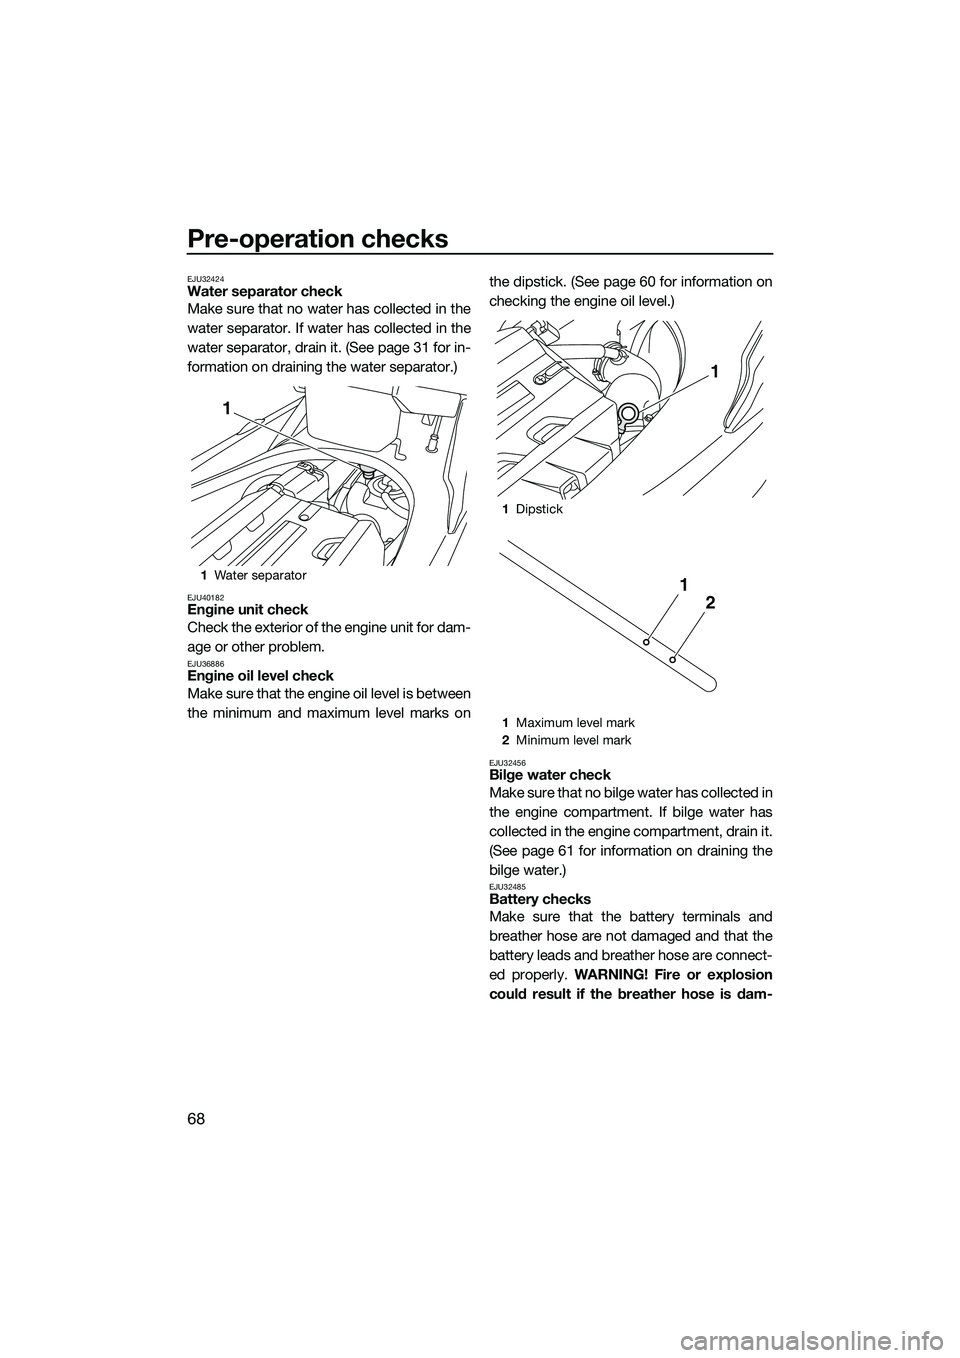 YAMAHA FX SVHO 2014  Owners Manual Pre-operation checks
68
EJU32424Water separator check
Make sure that no water has collected in the
water separator. If water has collected in the
water separator, drain it. (See page 31 for in-
format